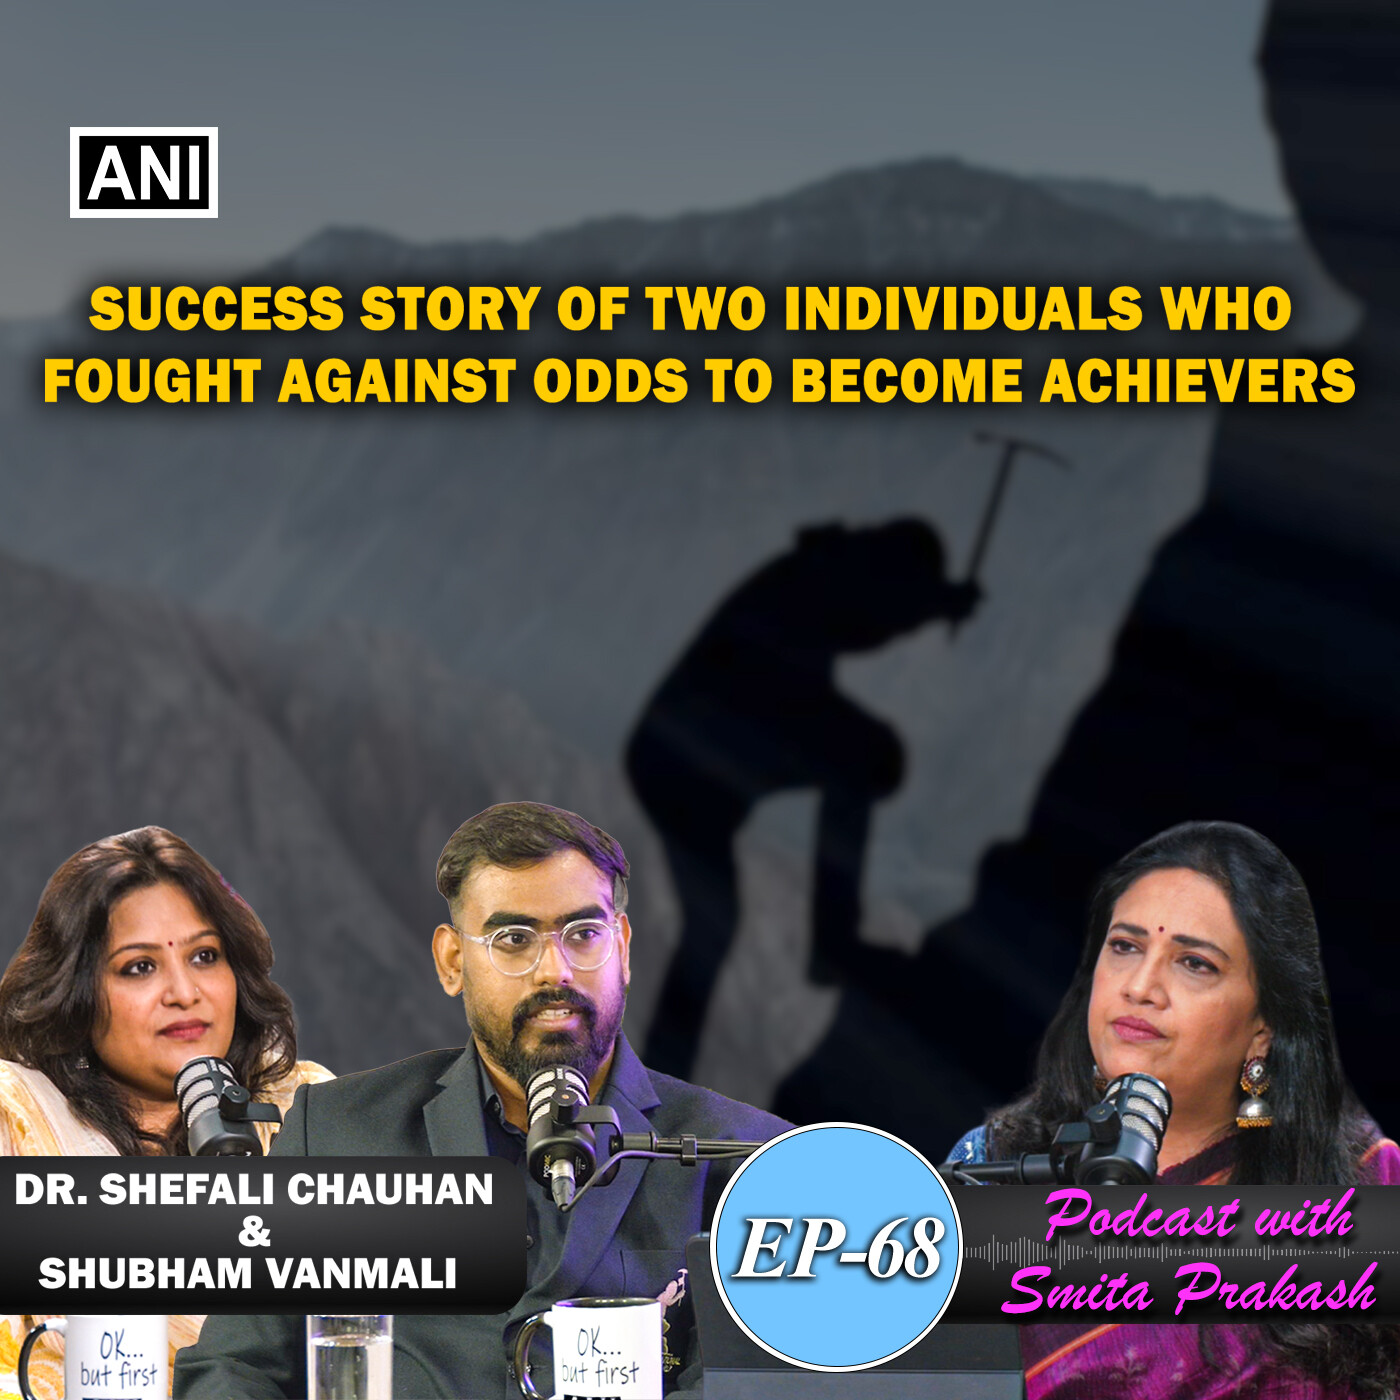 Episode 68 - Conquering Disabilities, Achieving Success with Shubham Vanmali & Dr. Shefali Chauhan